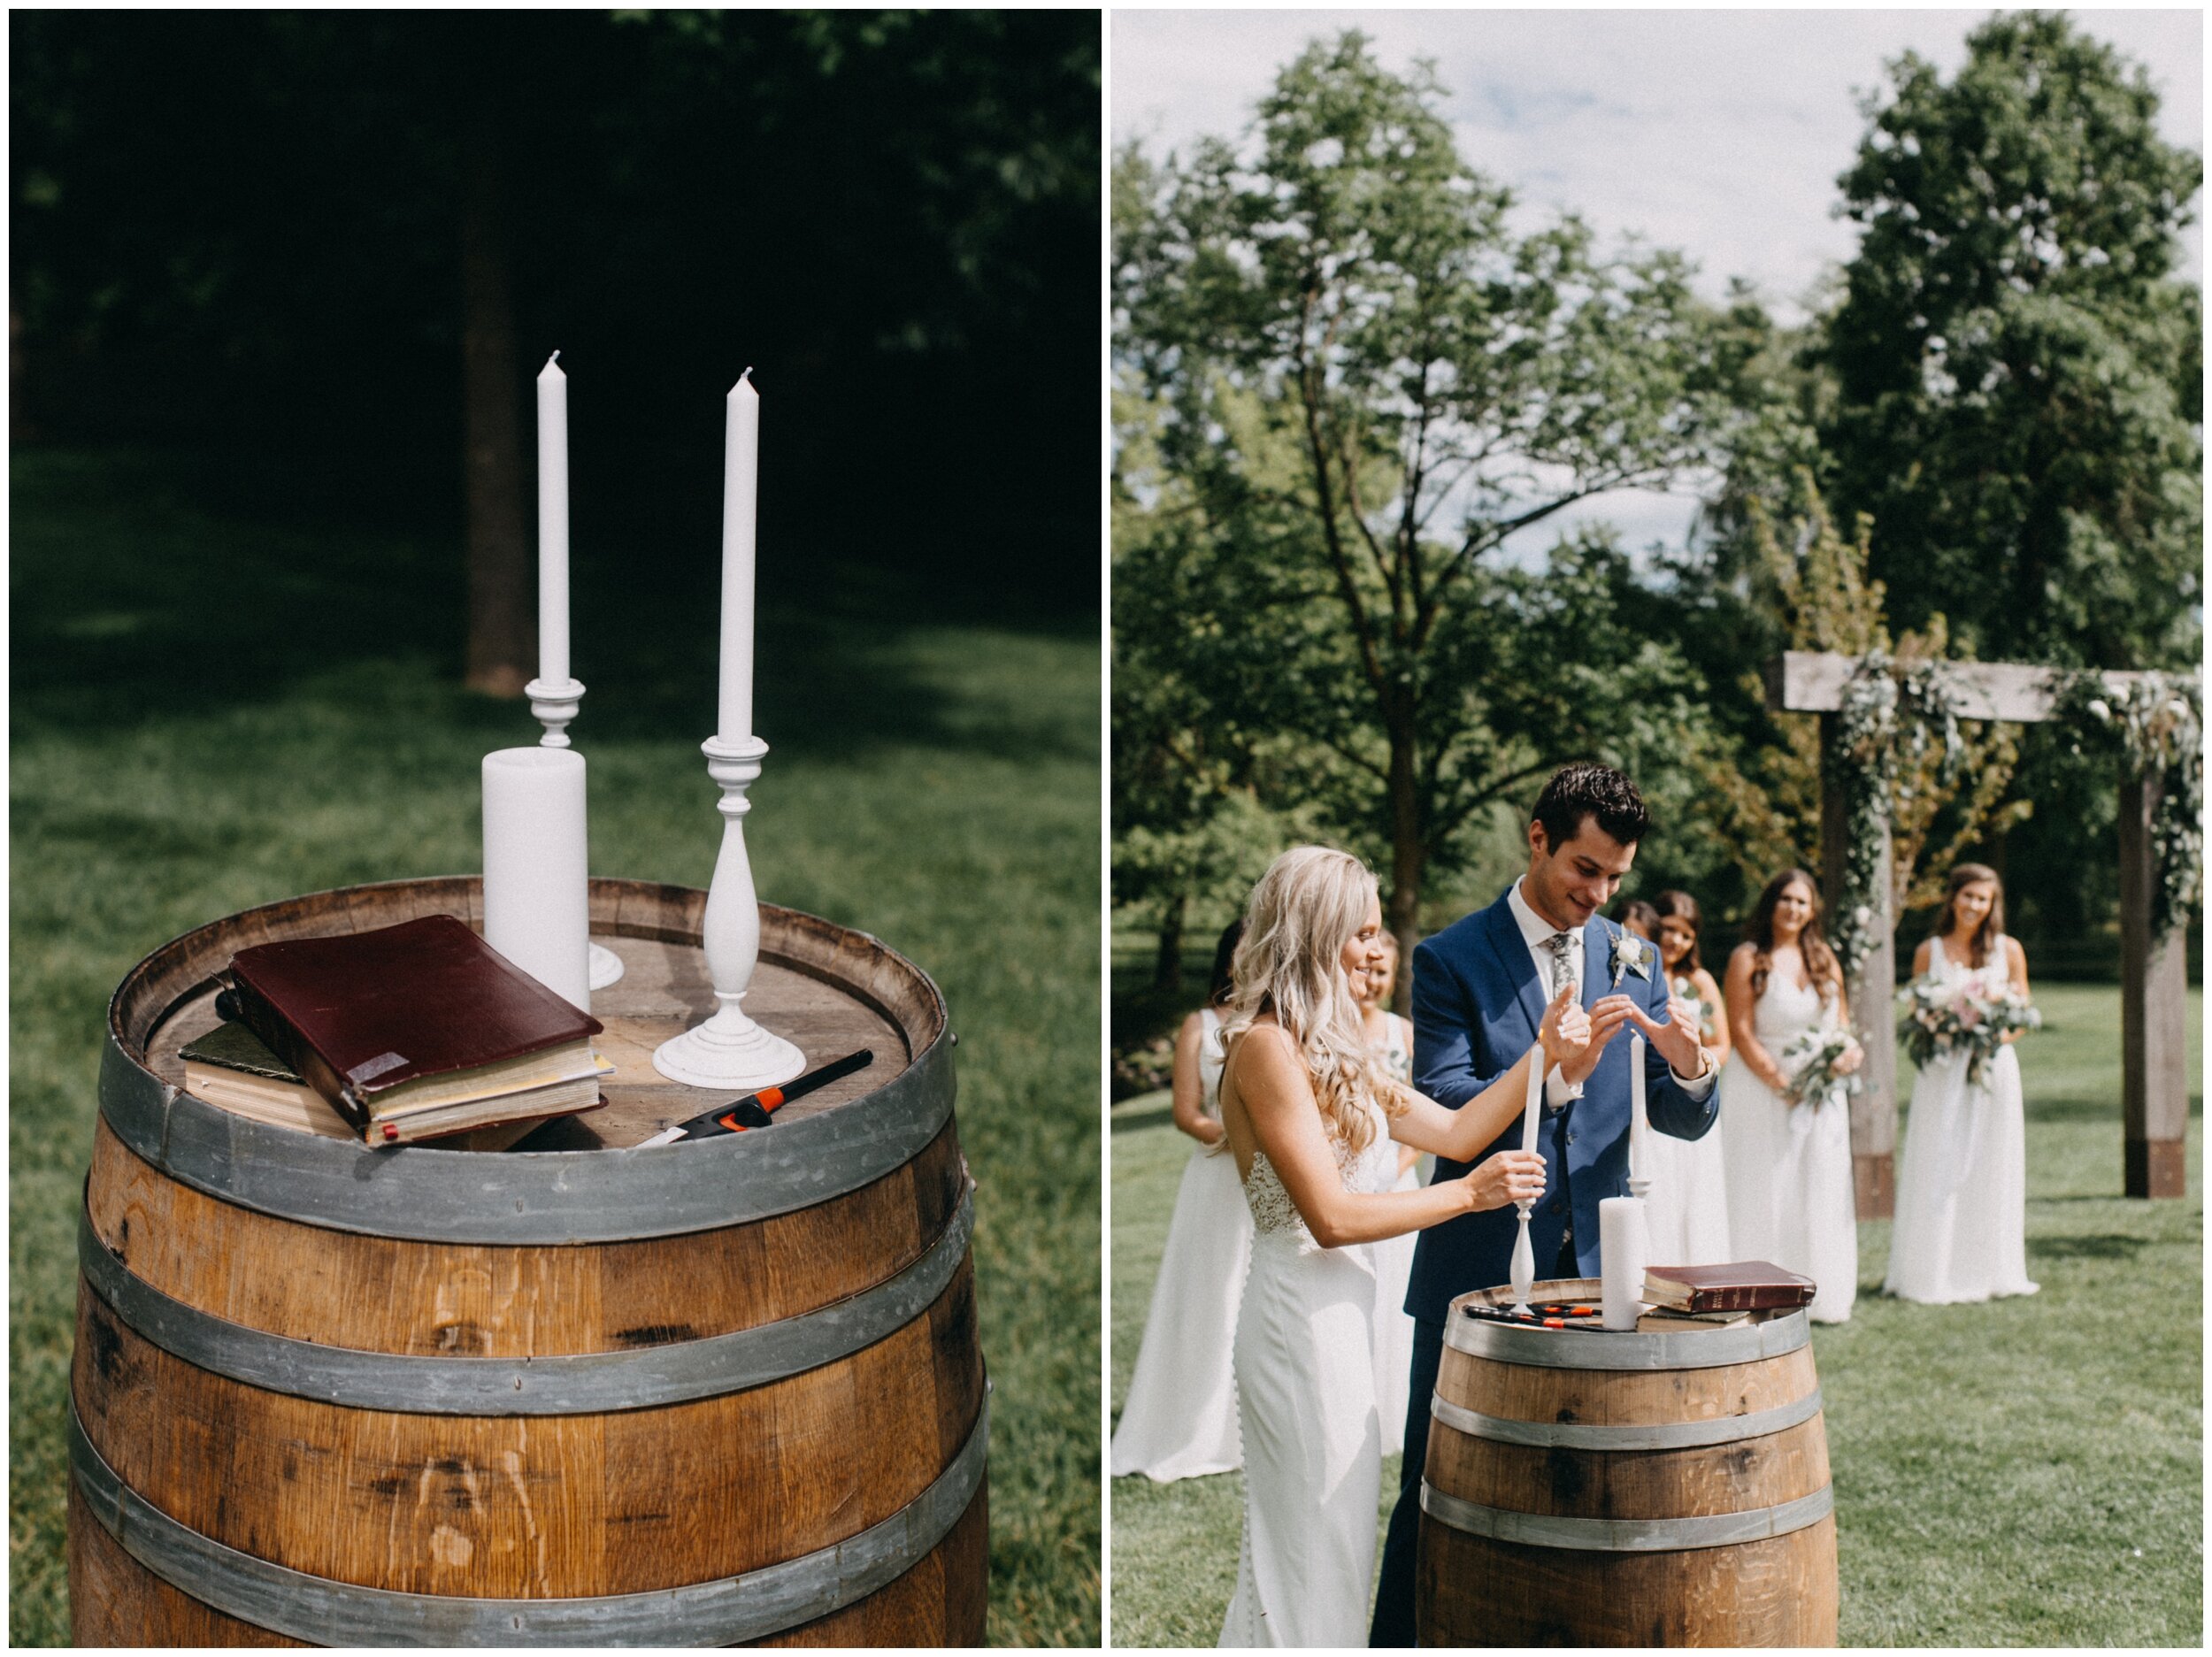 Bride and groom lighting unity candle during outdoor Minnesota barn wedding ceremony